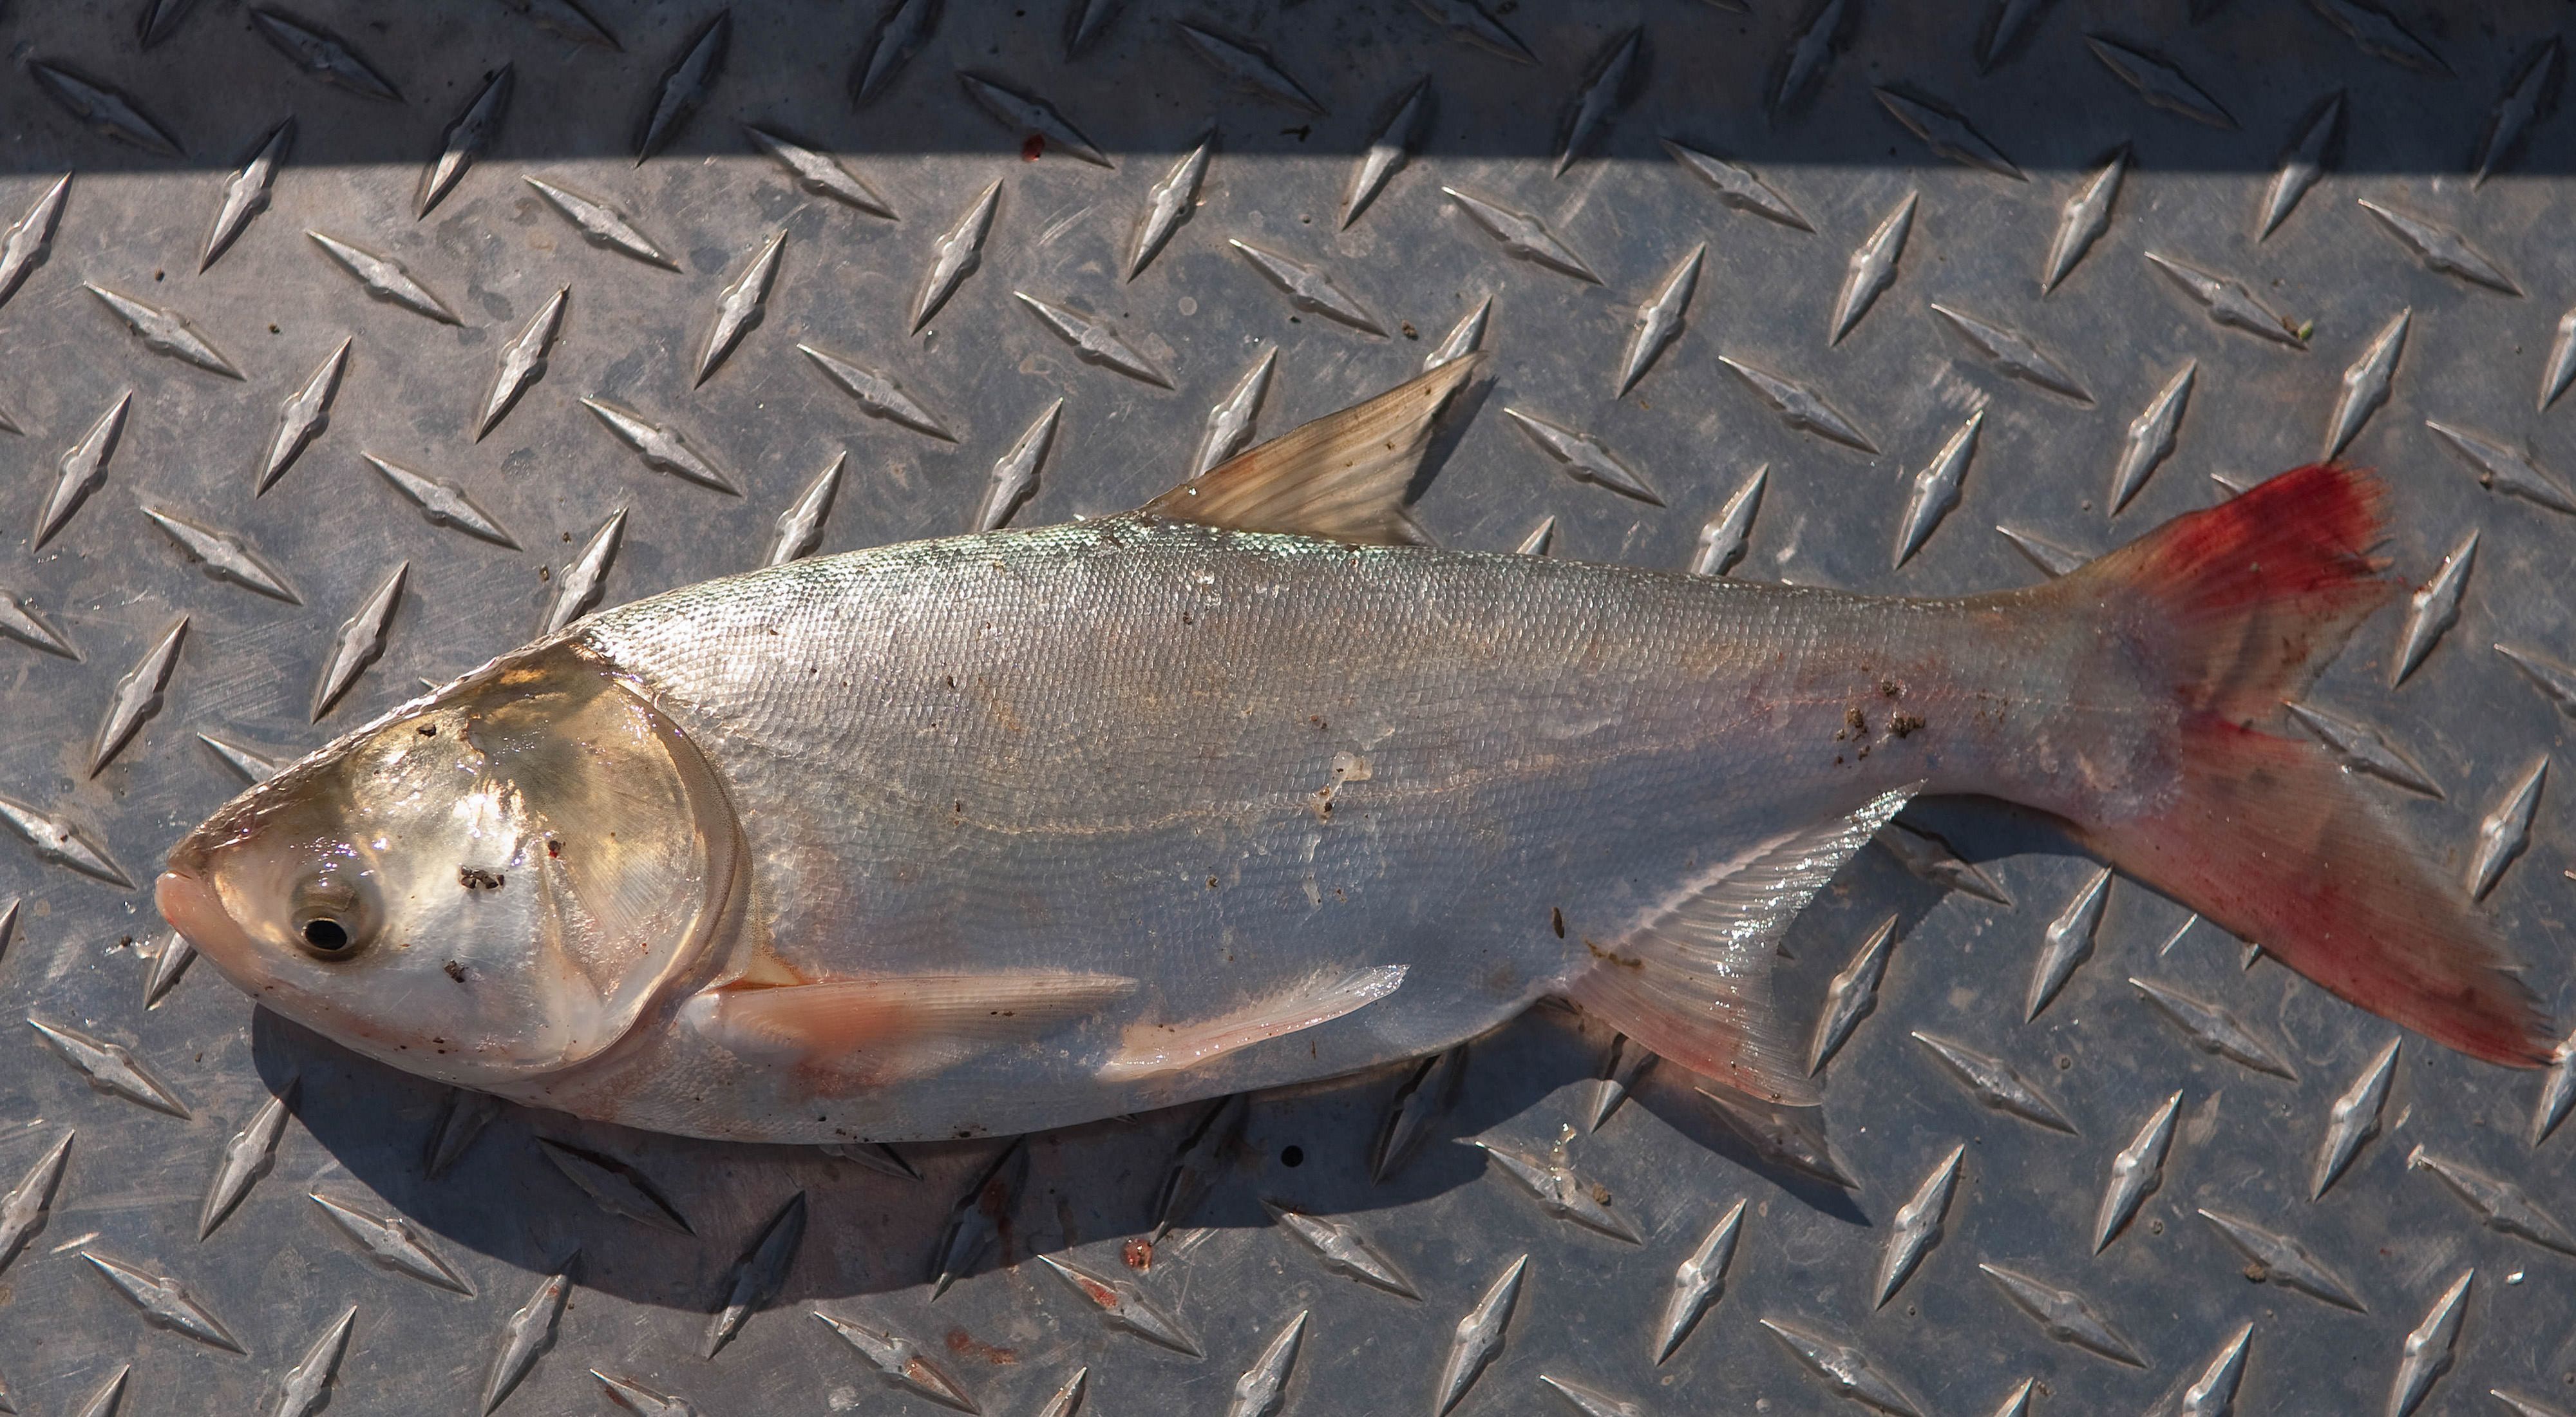 Closeup of a large asian carp on the deck of a boat.